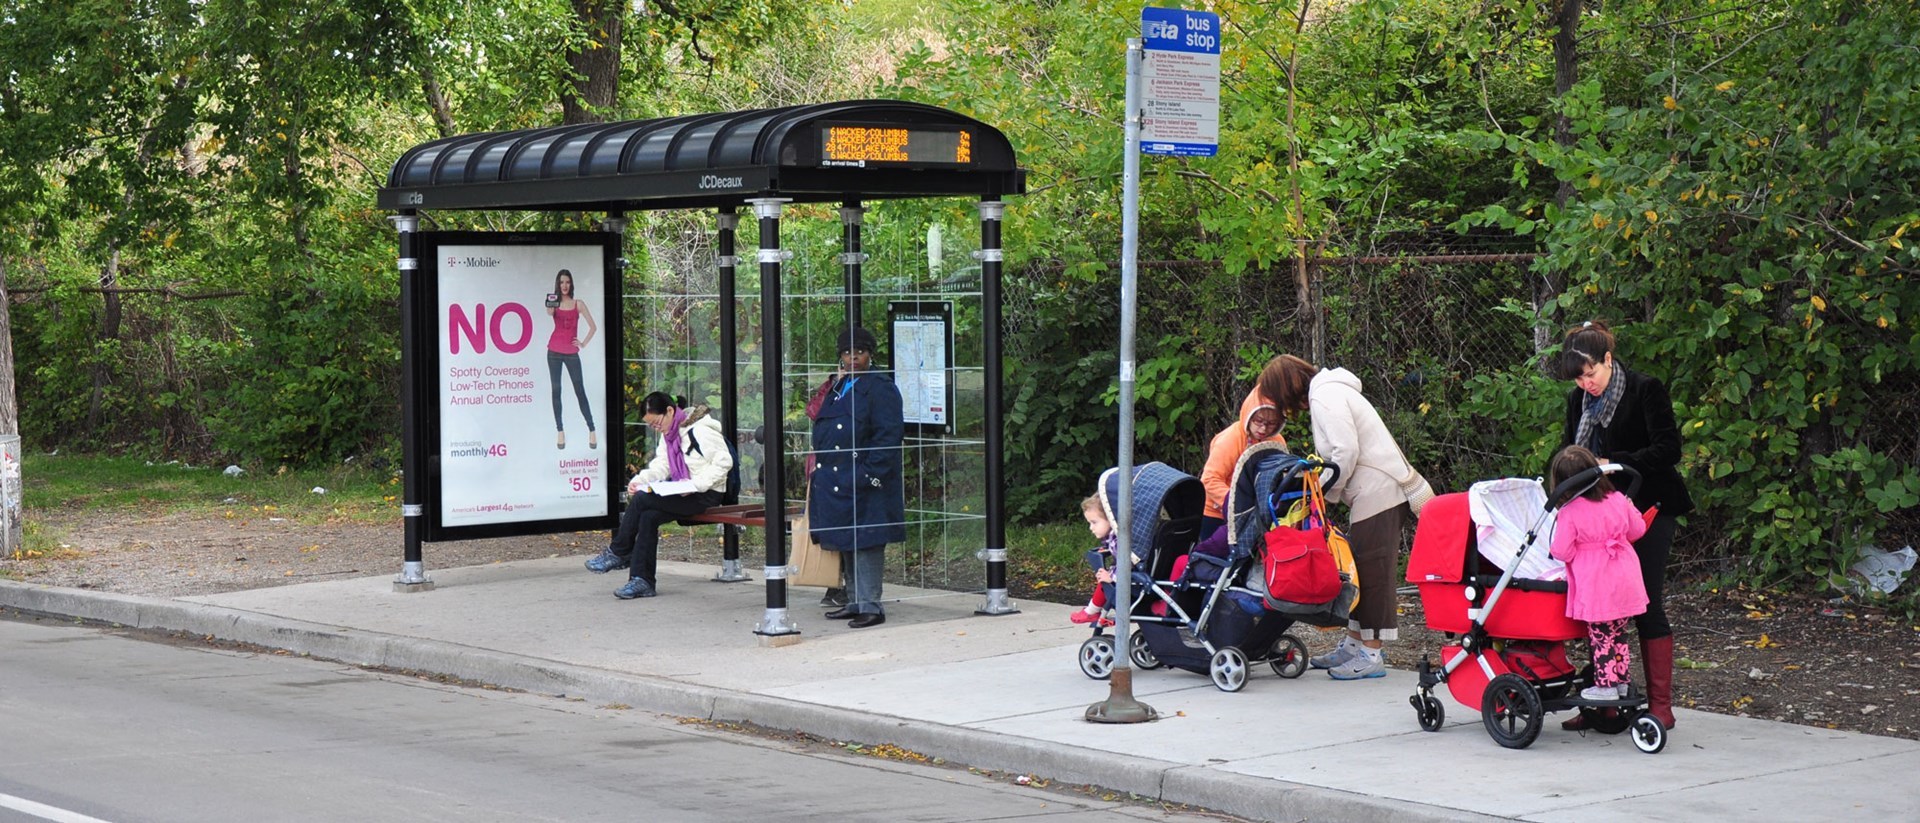 Bus shelter and pole